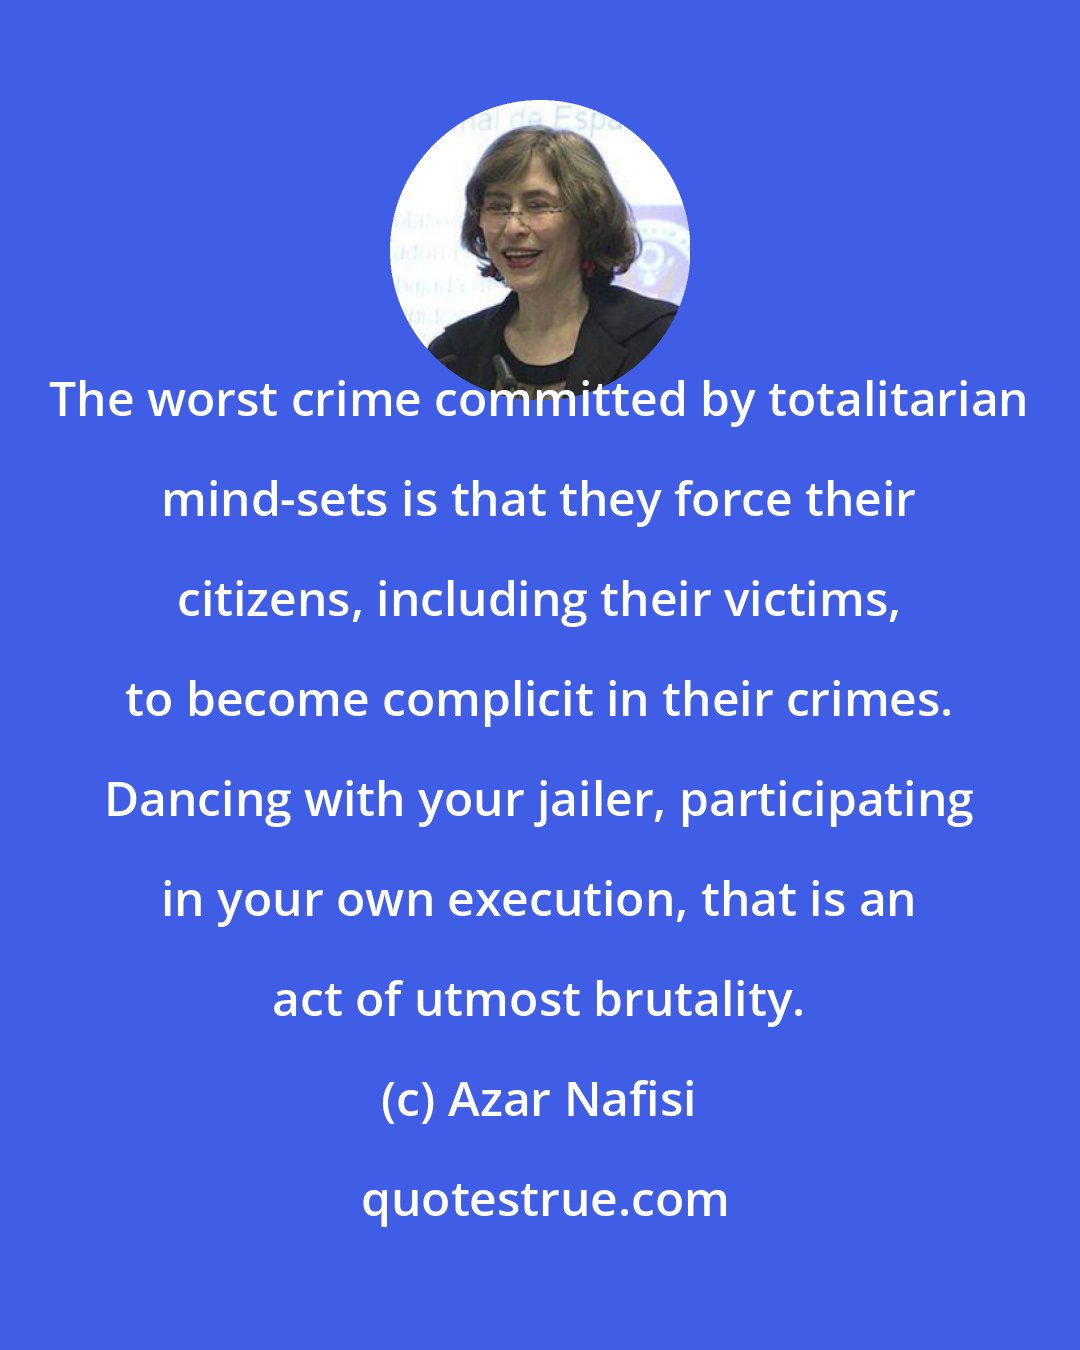 Azar Nafisi: The worst crime committed by totalitarian mind-sets is that they force their citizens, including their victims, to become complicit in their crimes. Dancing with your jailer, participating in your own execution, that is an act of utmost brutality.